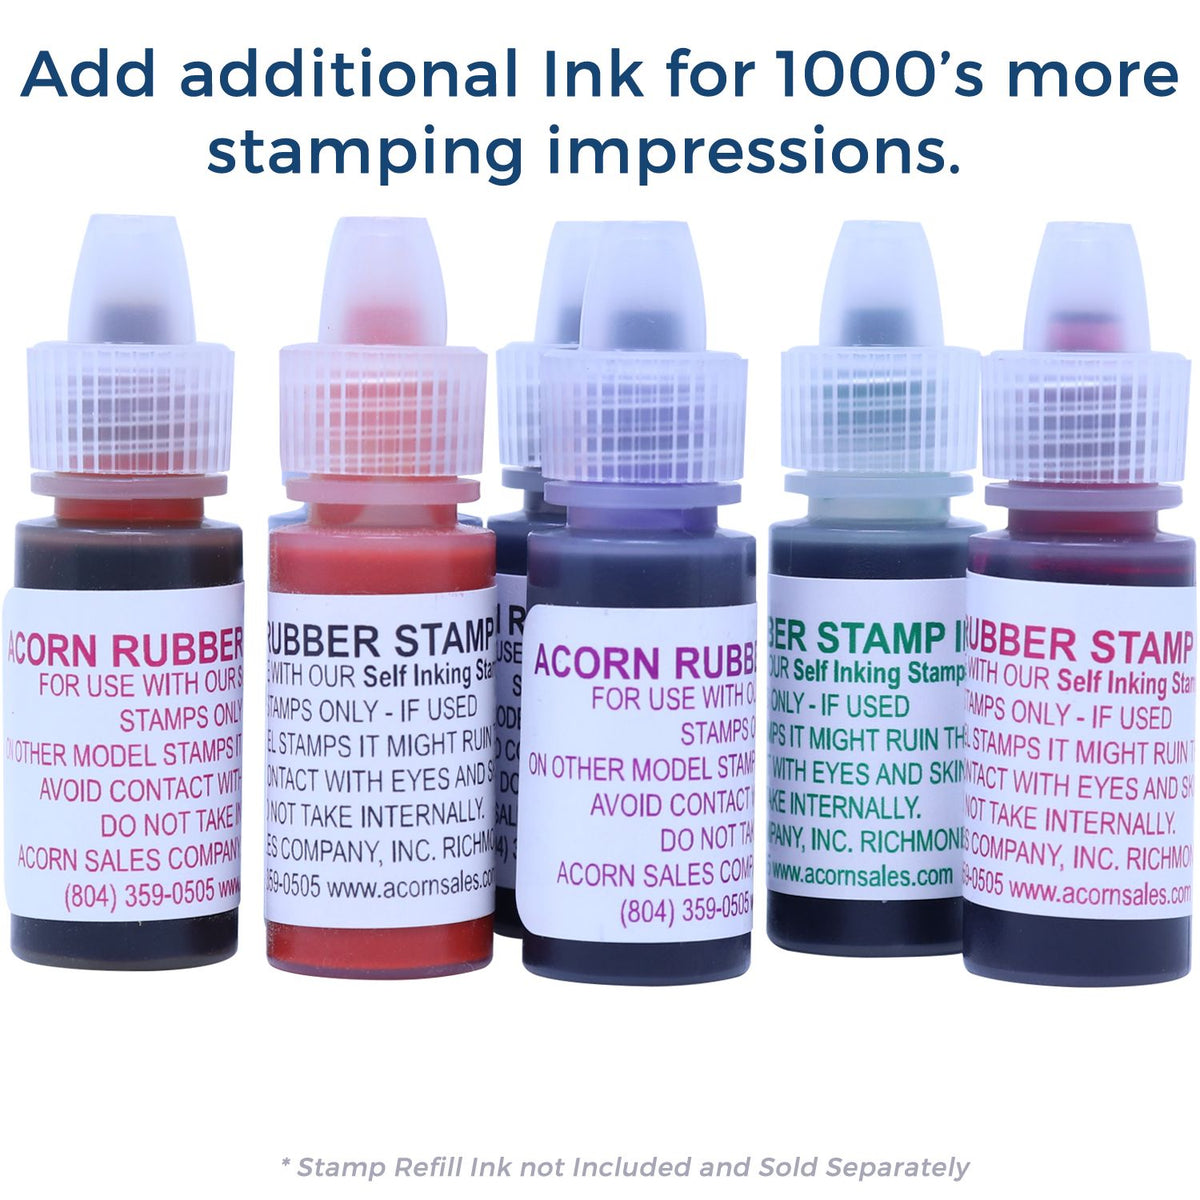 Refill Ink for Self-Inking Round Smiley Stamp Available